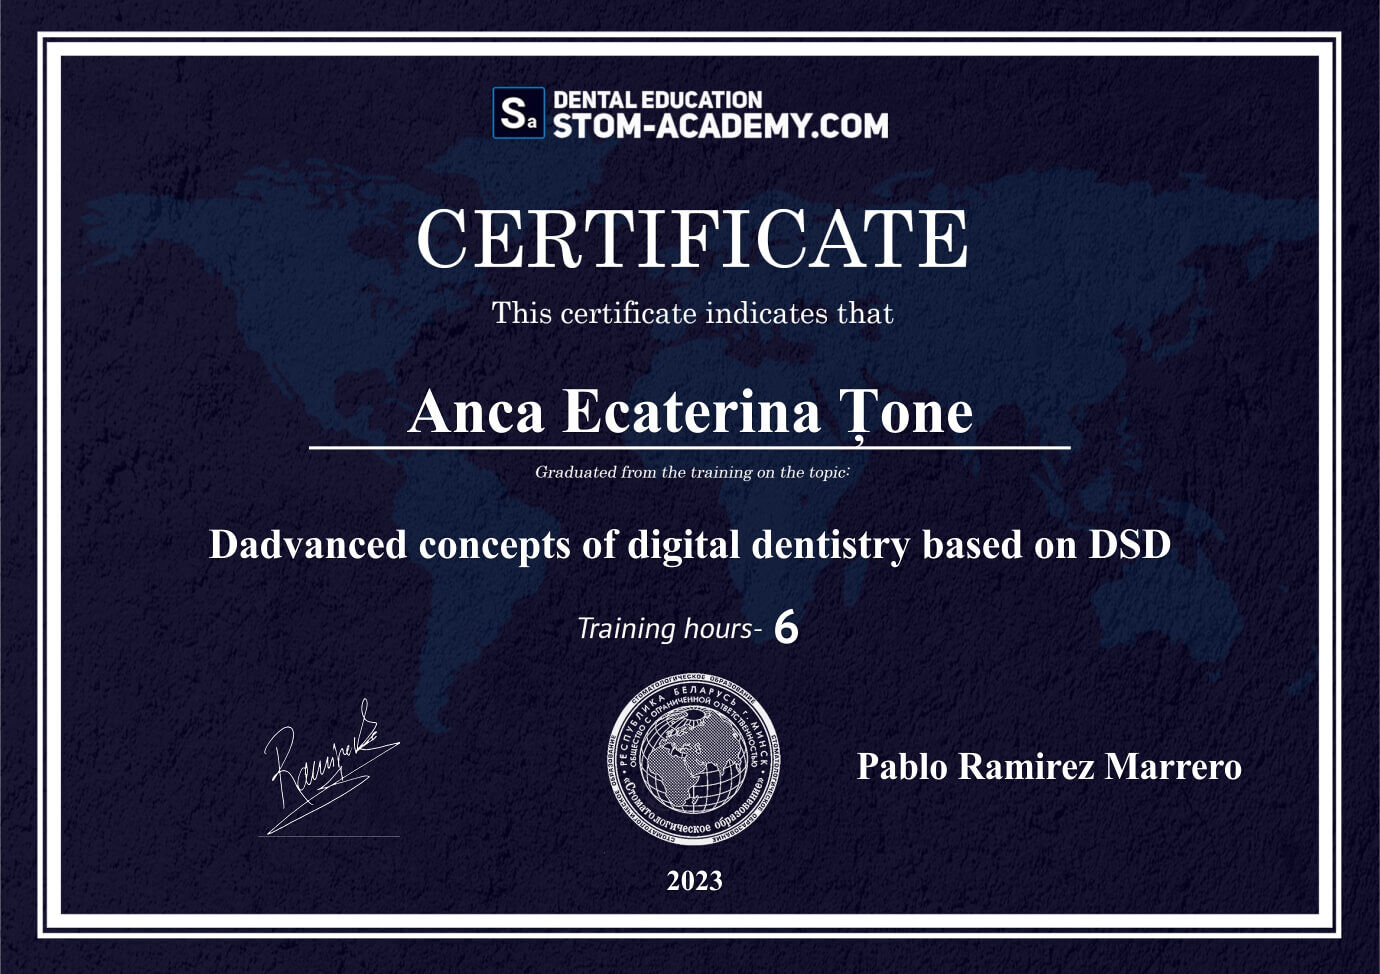 Certificate - Advanced concepts of digital dentistry based on DSD